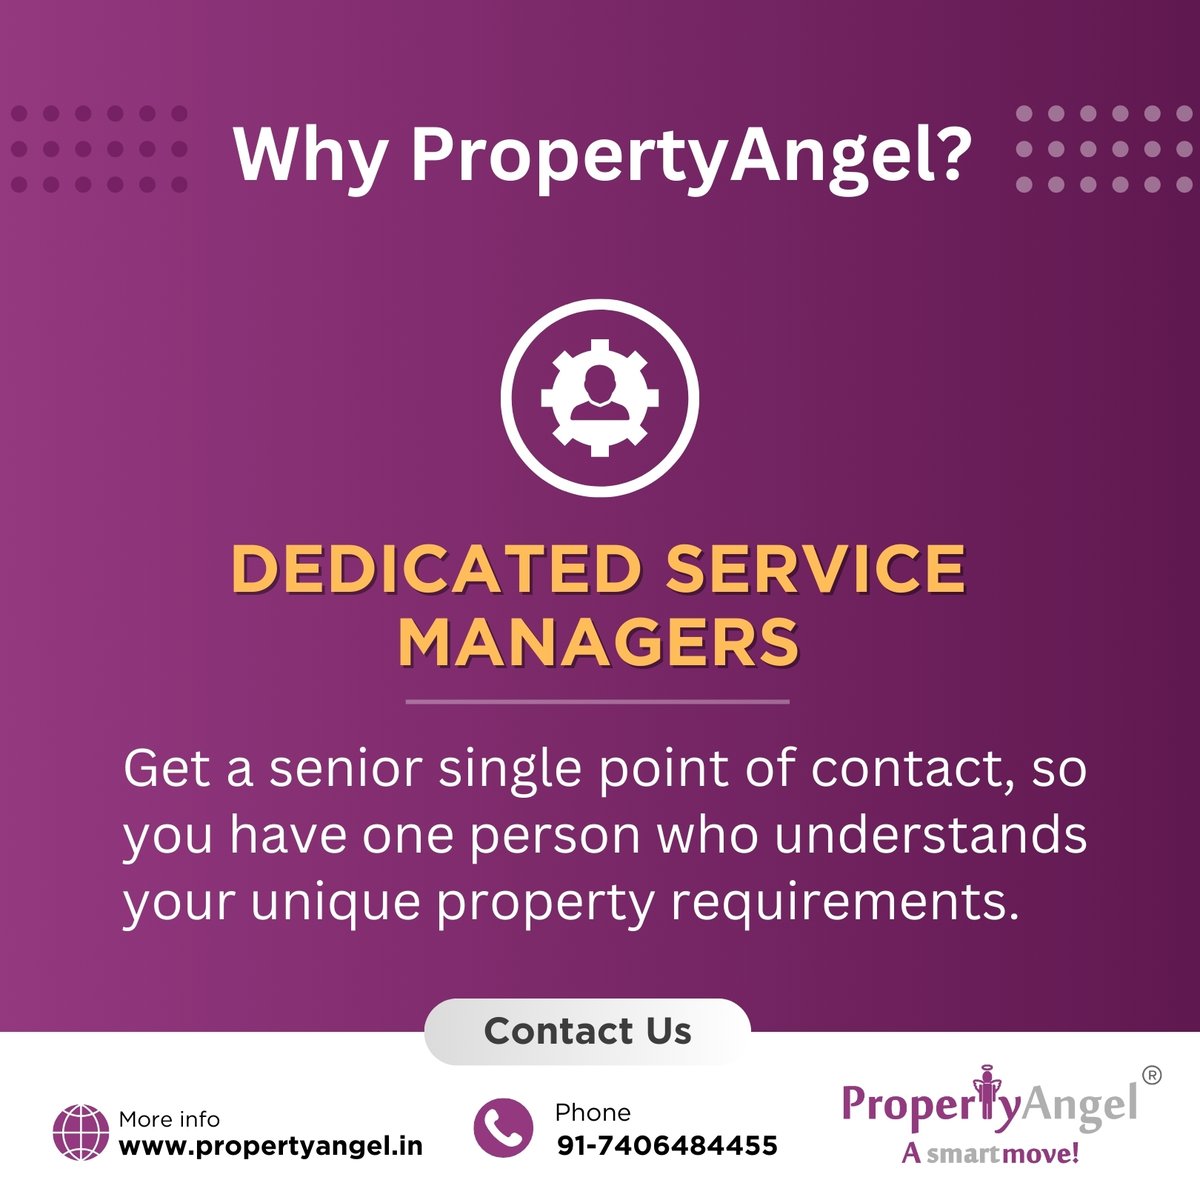 At Propertyangel, we believe in personalized care. That's why we provide a senior single point of contact for each client - ensuring someone always understands your unique property needs. 

#PropertyAngel #PropertyManagement #CustomerCare #DedicatedService #BangaloreProperty